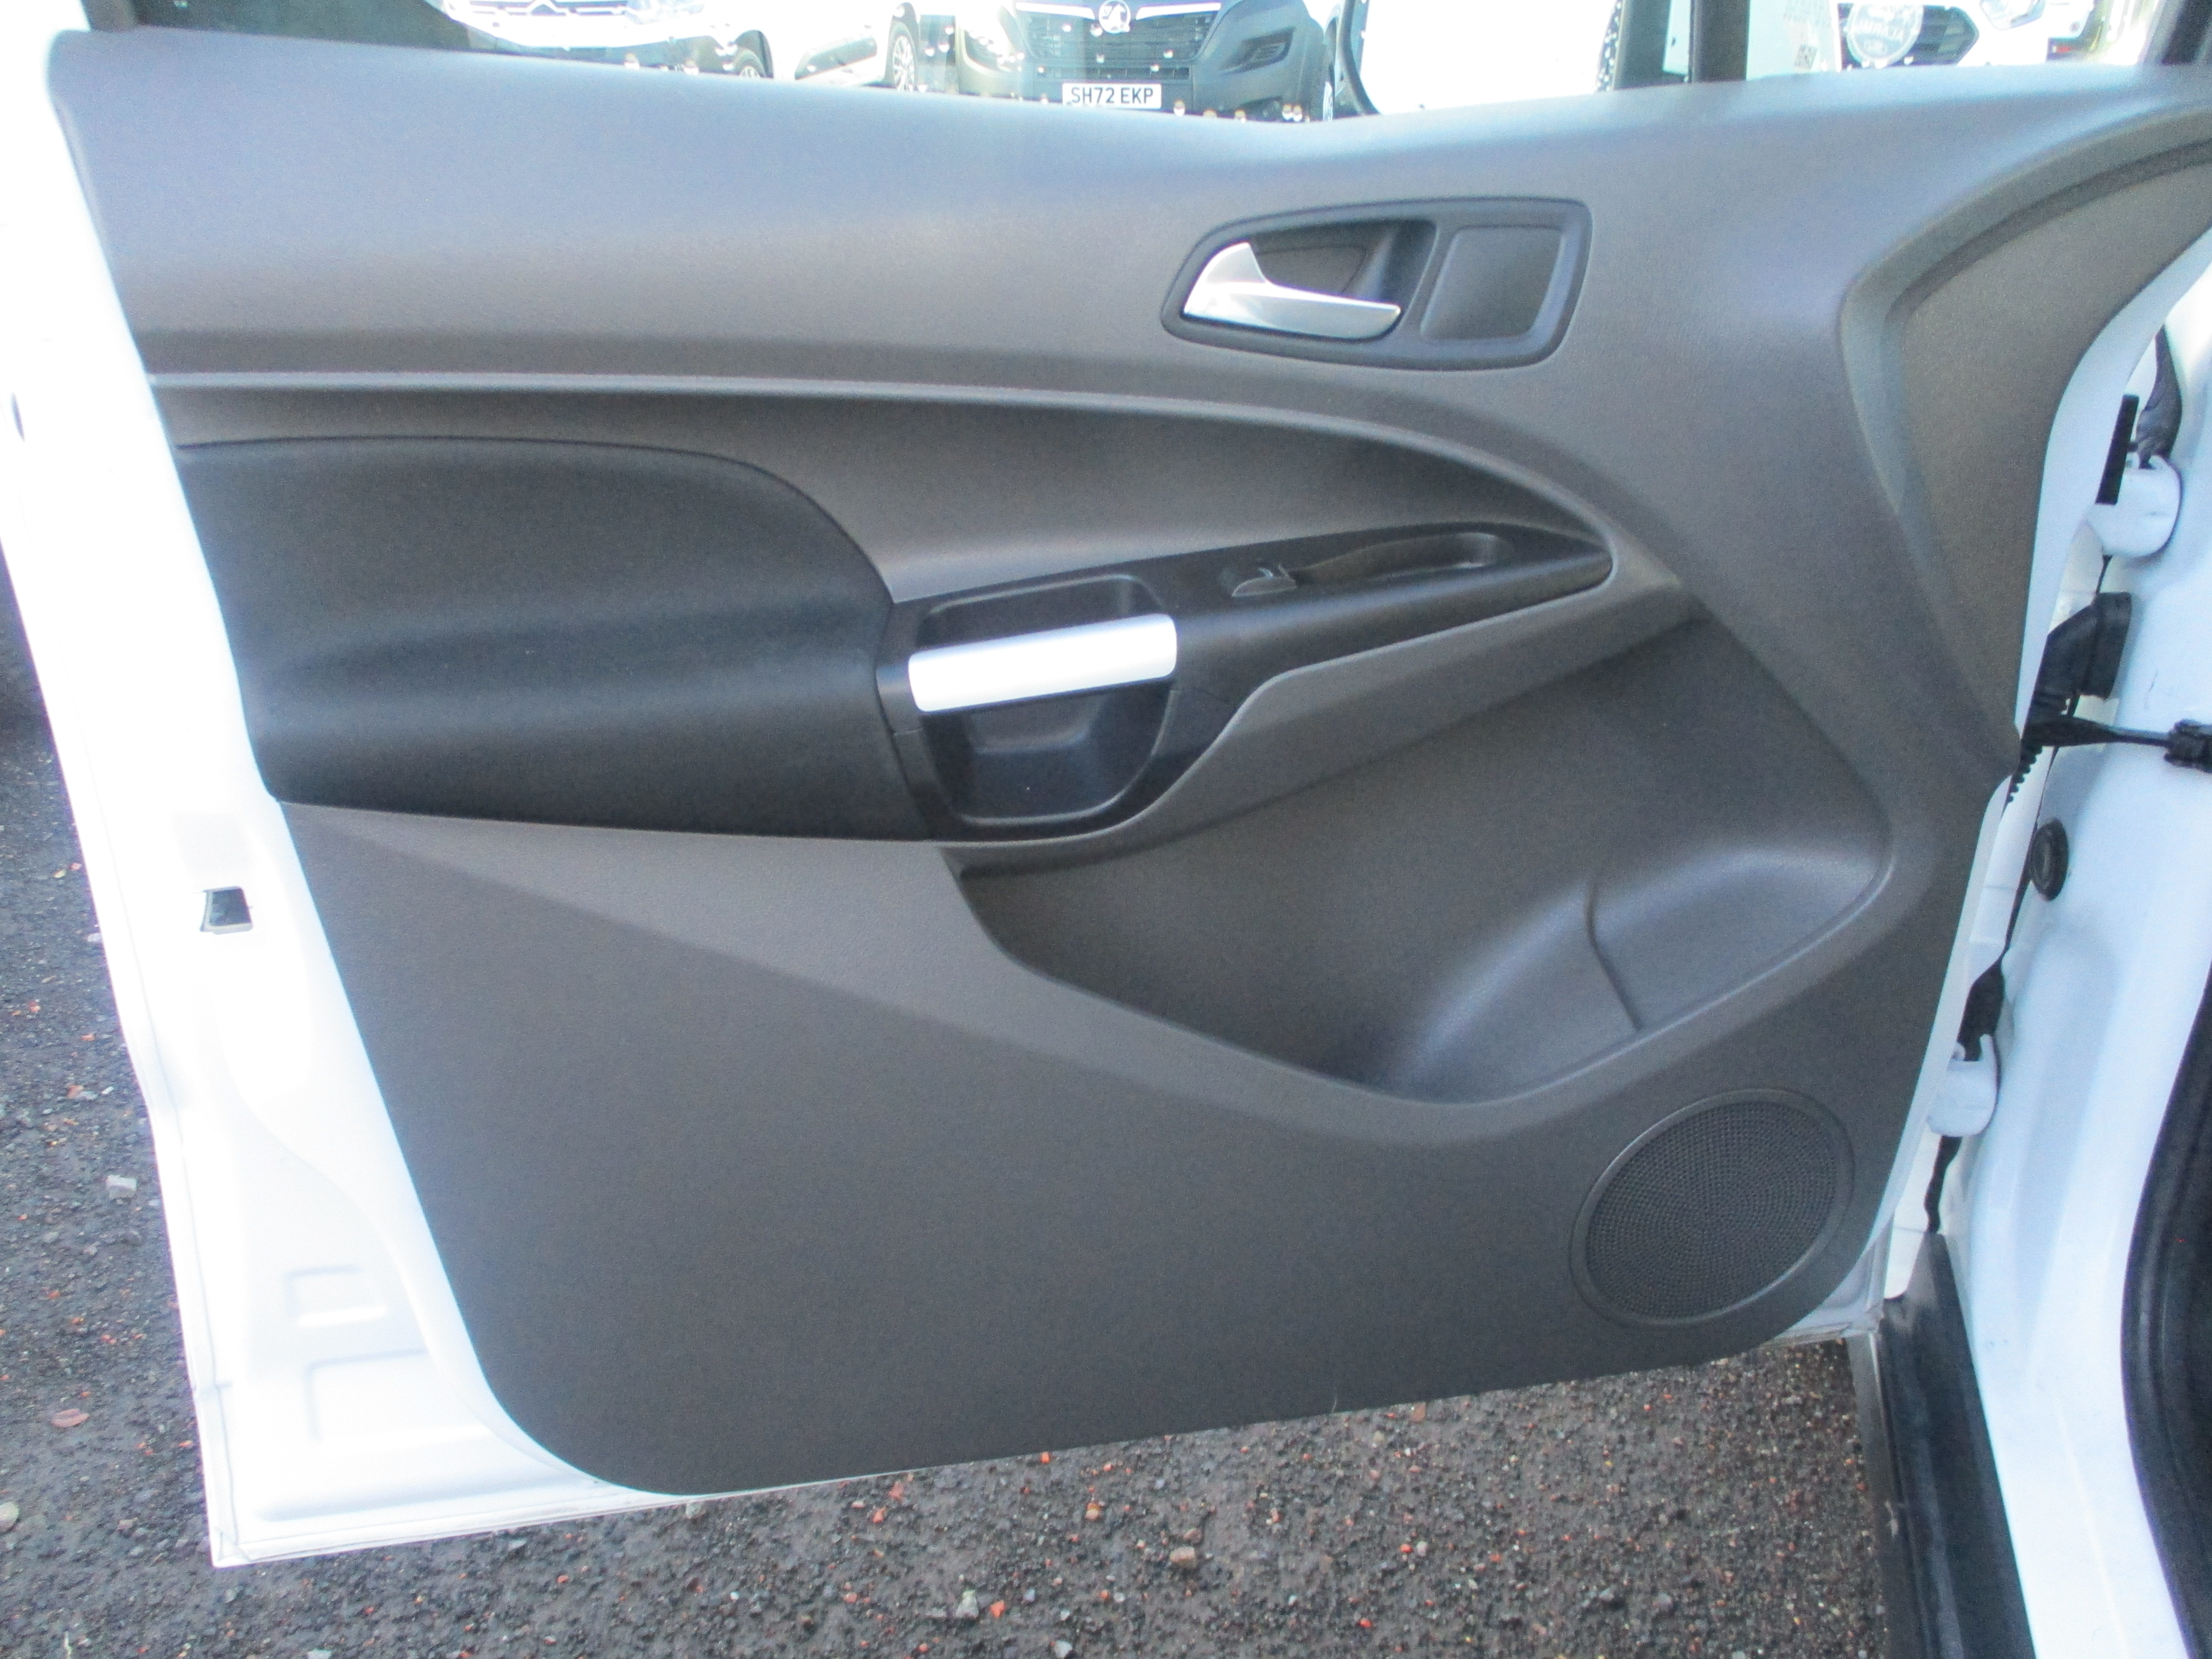 Ford Connect 200 L1 1.5 EcoBlue 120PS Limited Panel Van ( EURO 6 ) 3 FRONT SEATS £200 OFF RRP !!